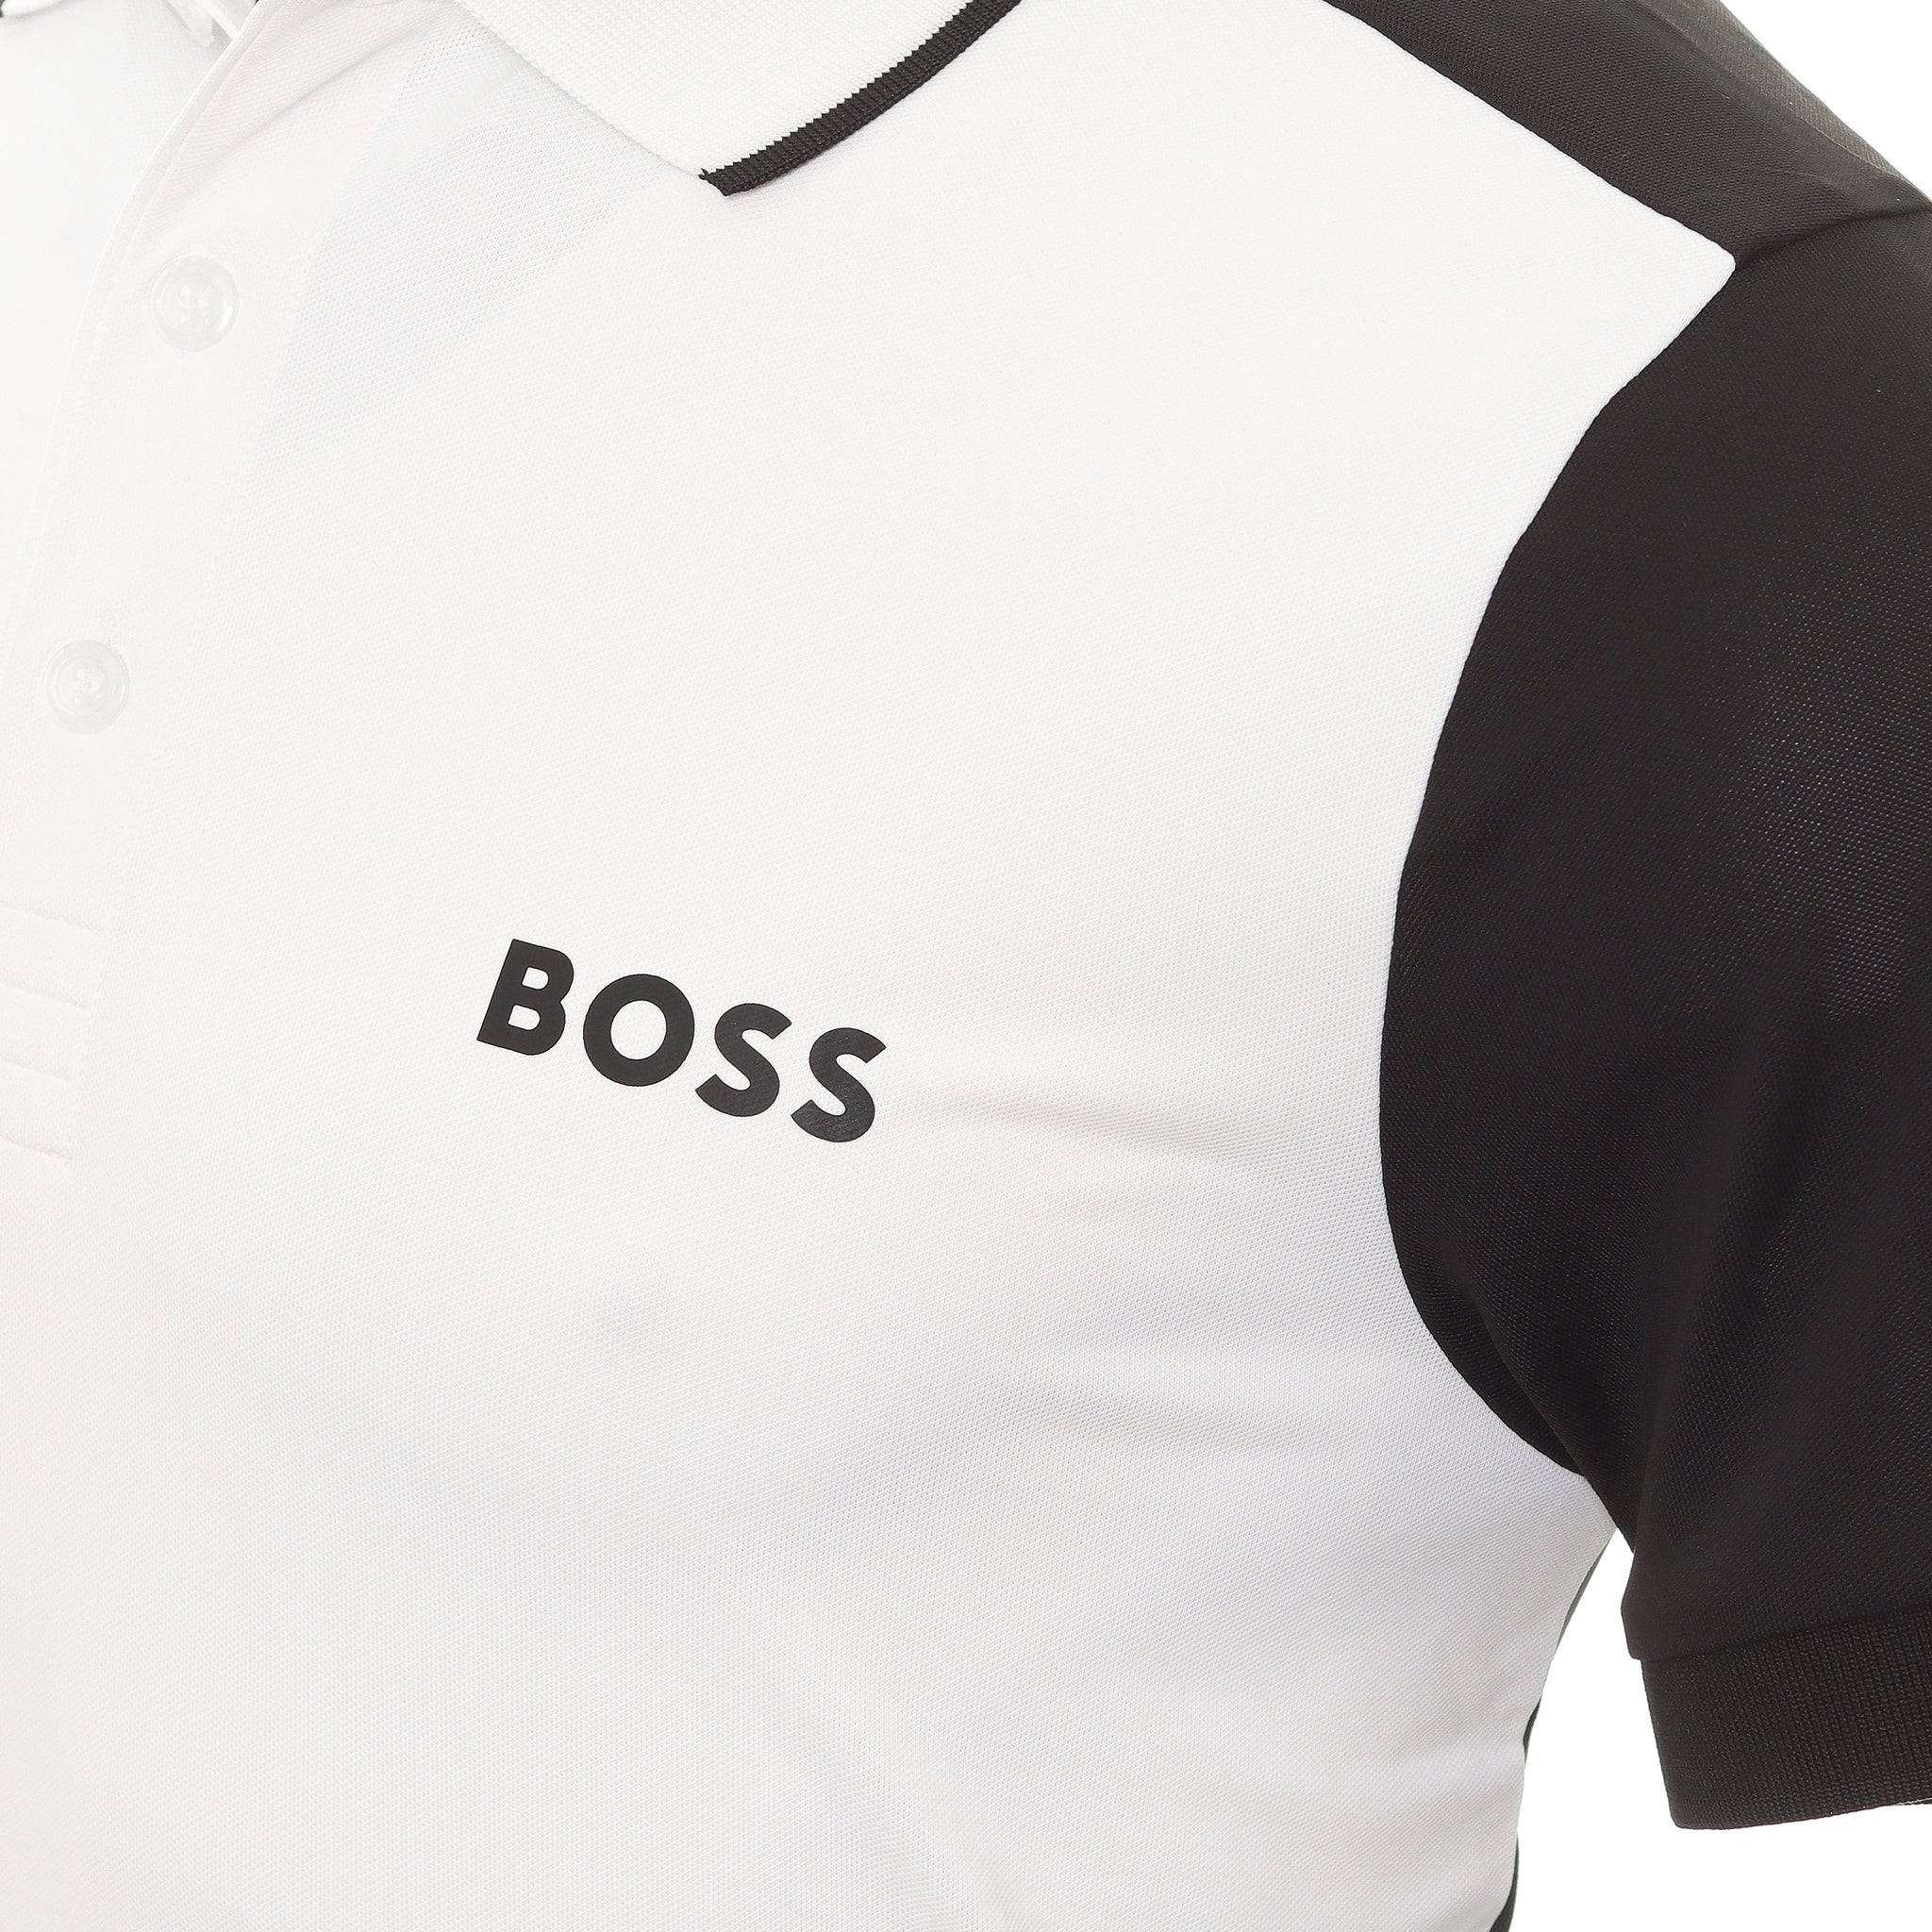 BOSS Patteo MB 8 Polo Shirt 50488836 White 100 | Function18 | Restrictedgs